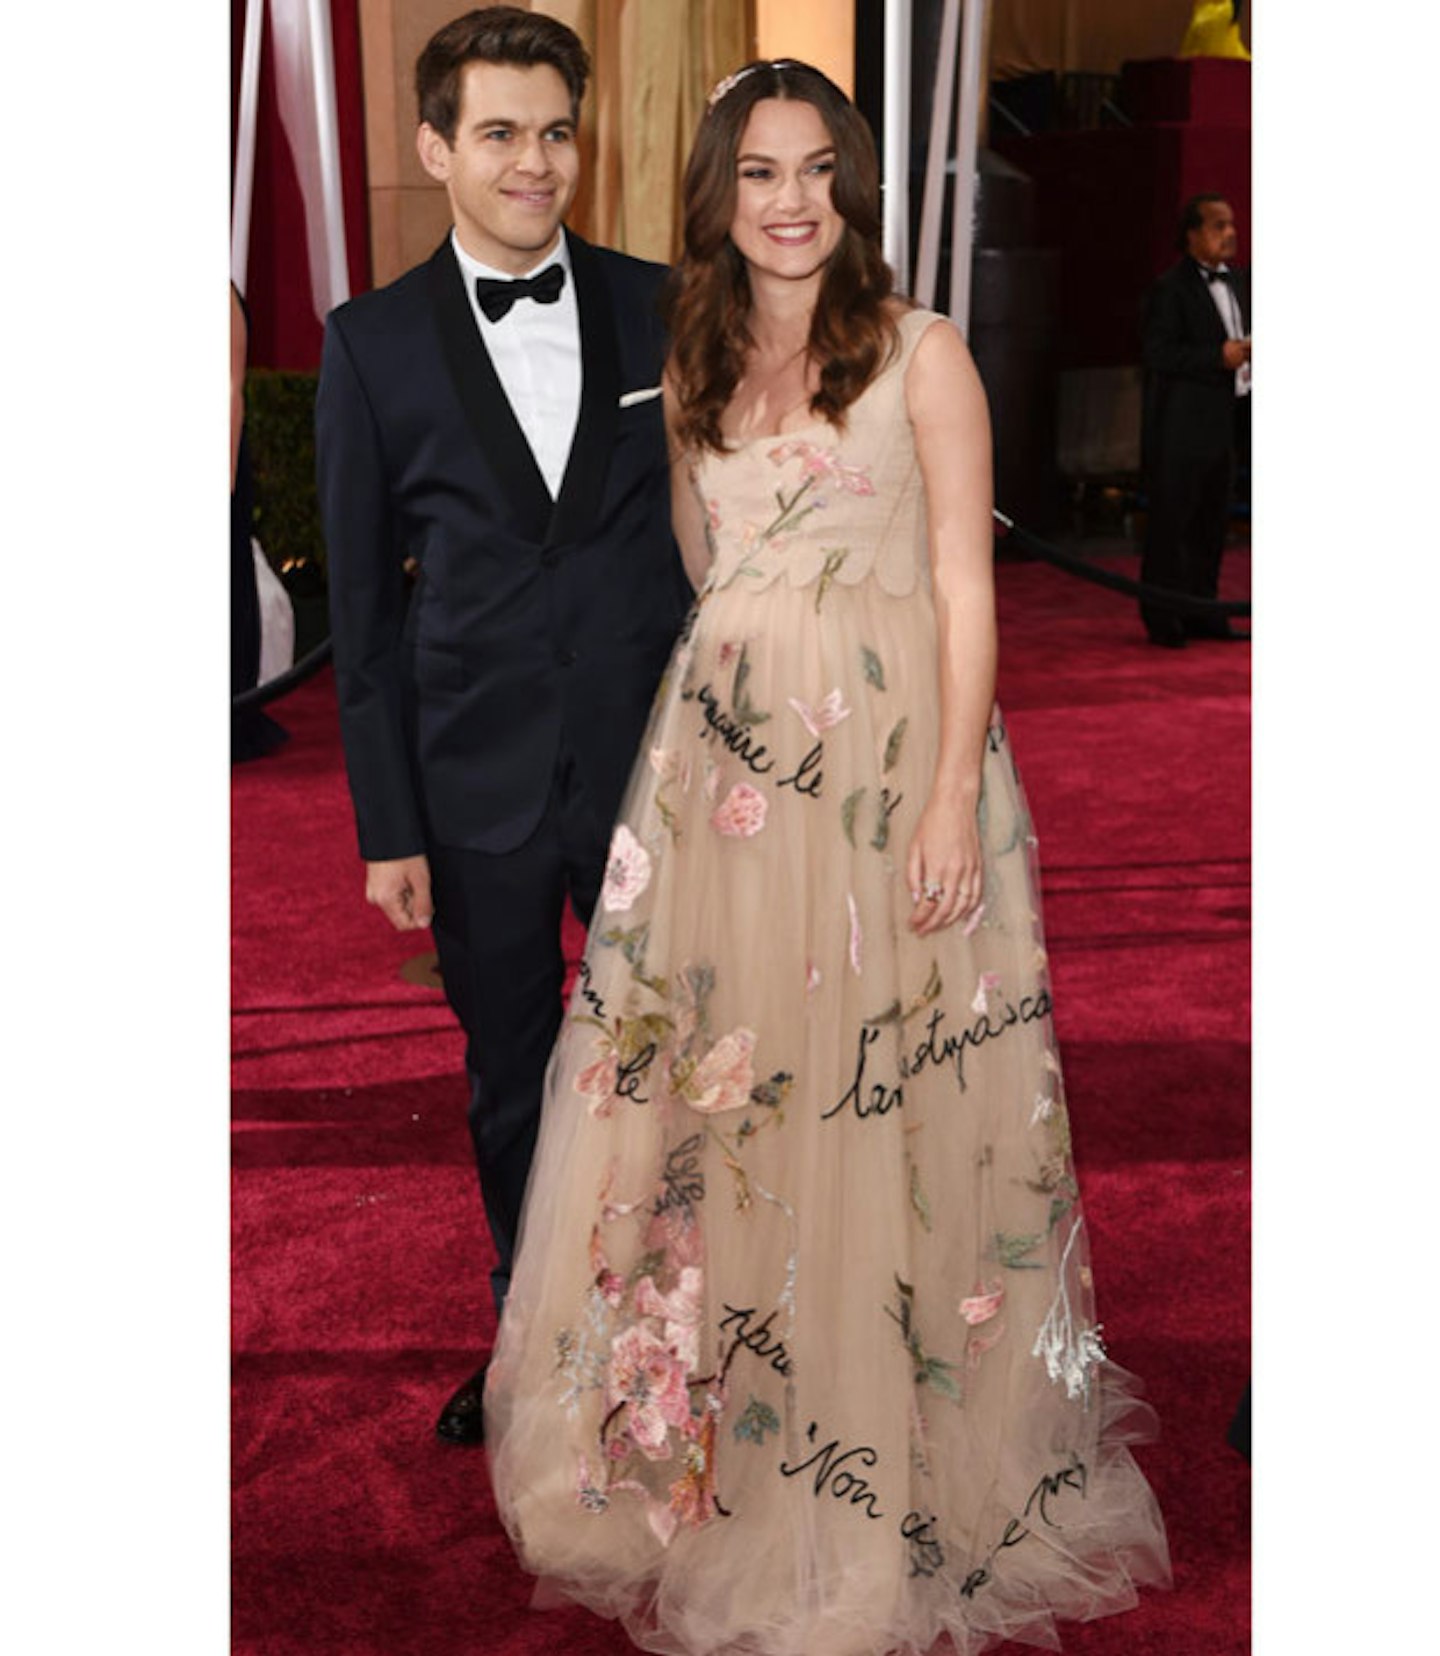 The happiest couple EVER at the 2015 Oscars (in Valentino)